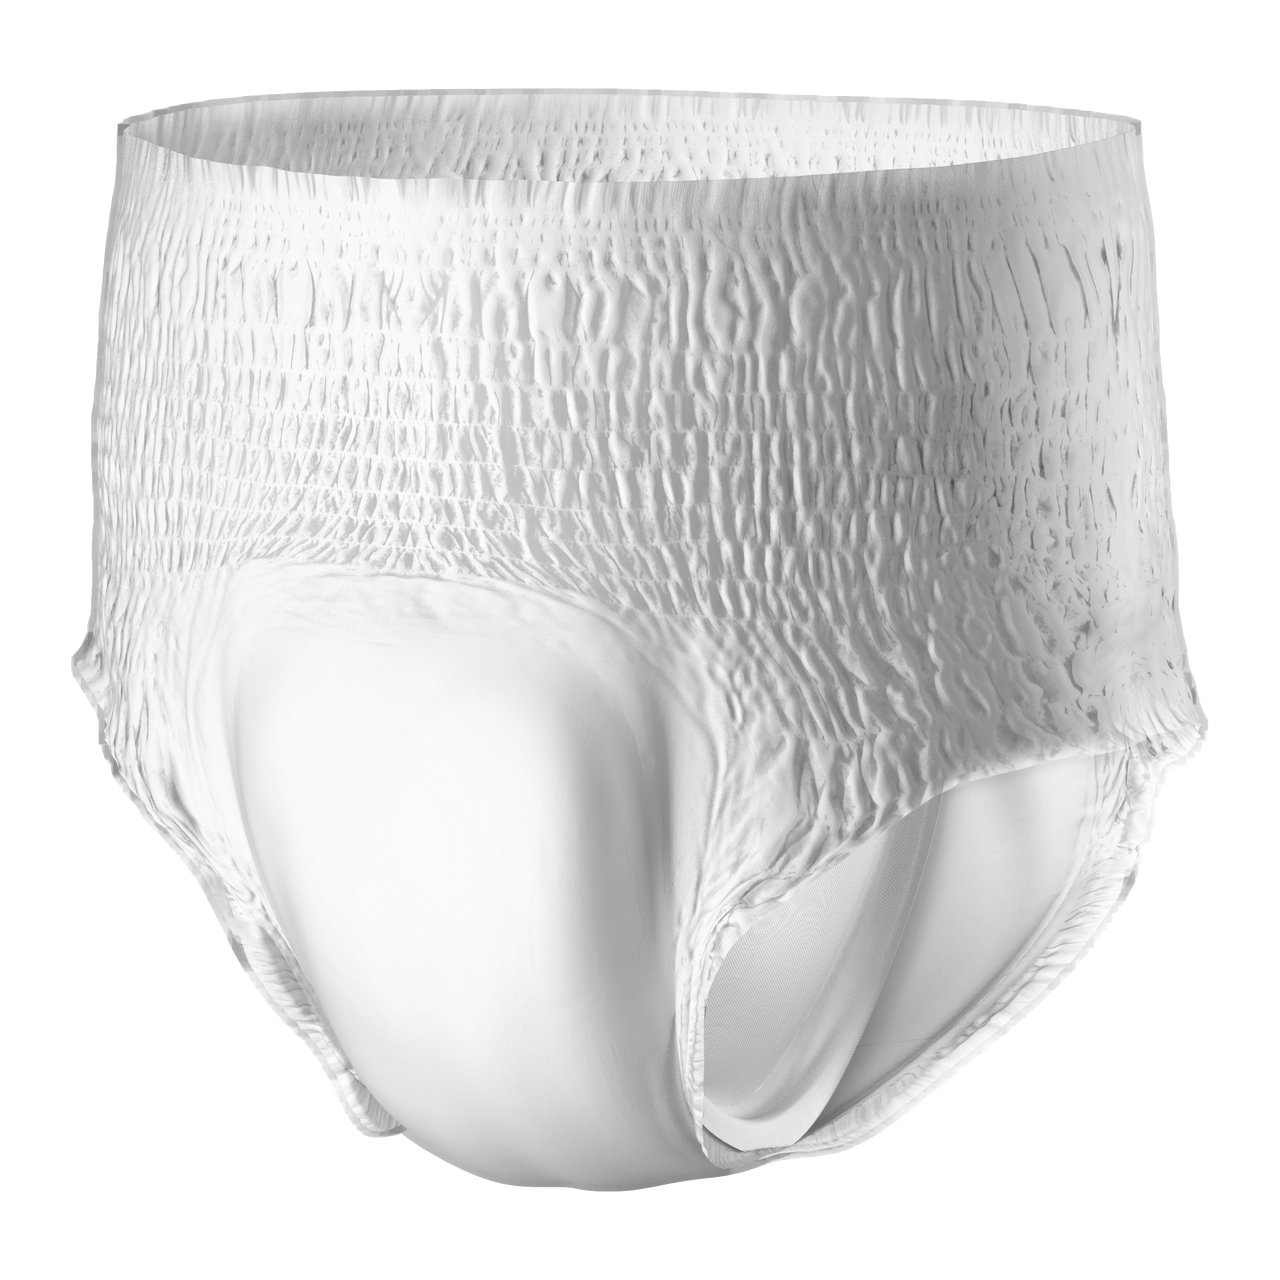 Prevail Incontinence Underwear for Men & Women, Extra Absorbency